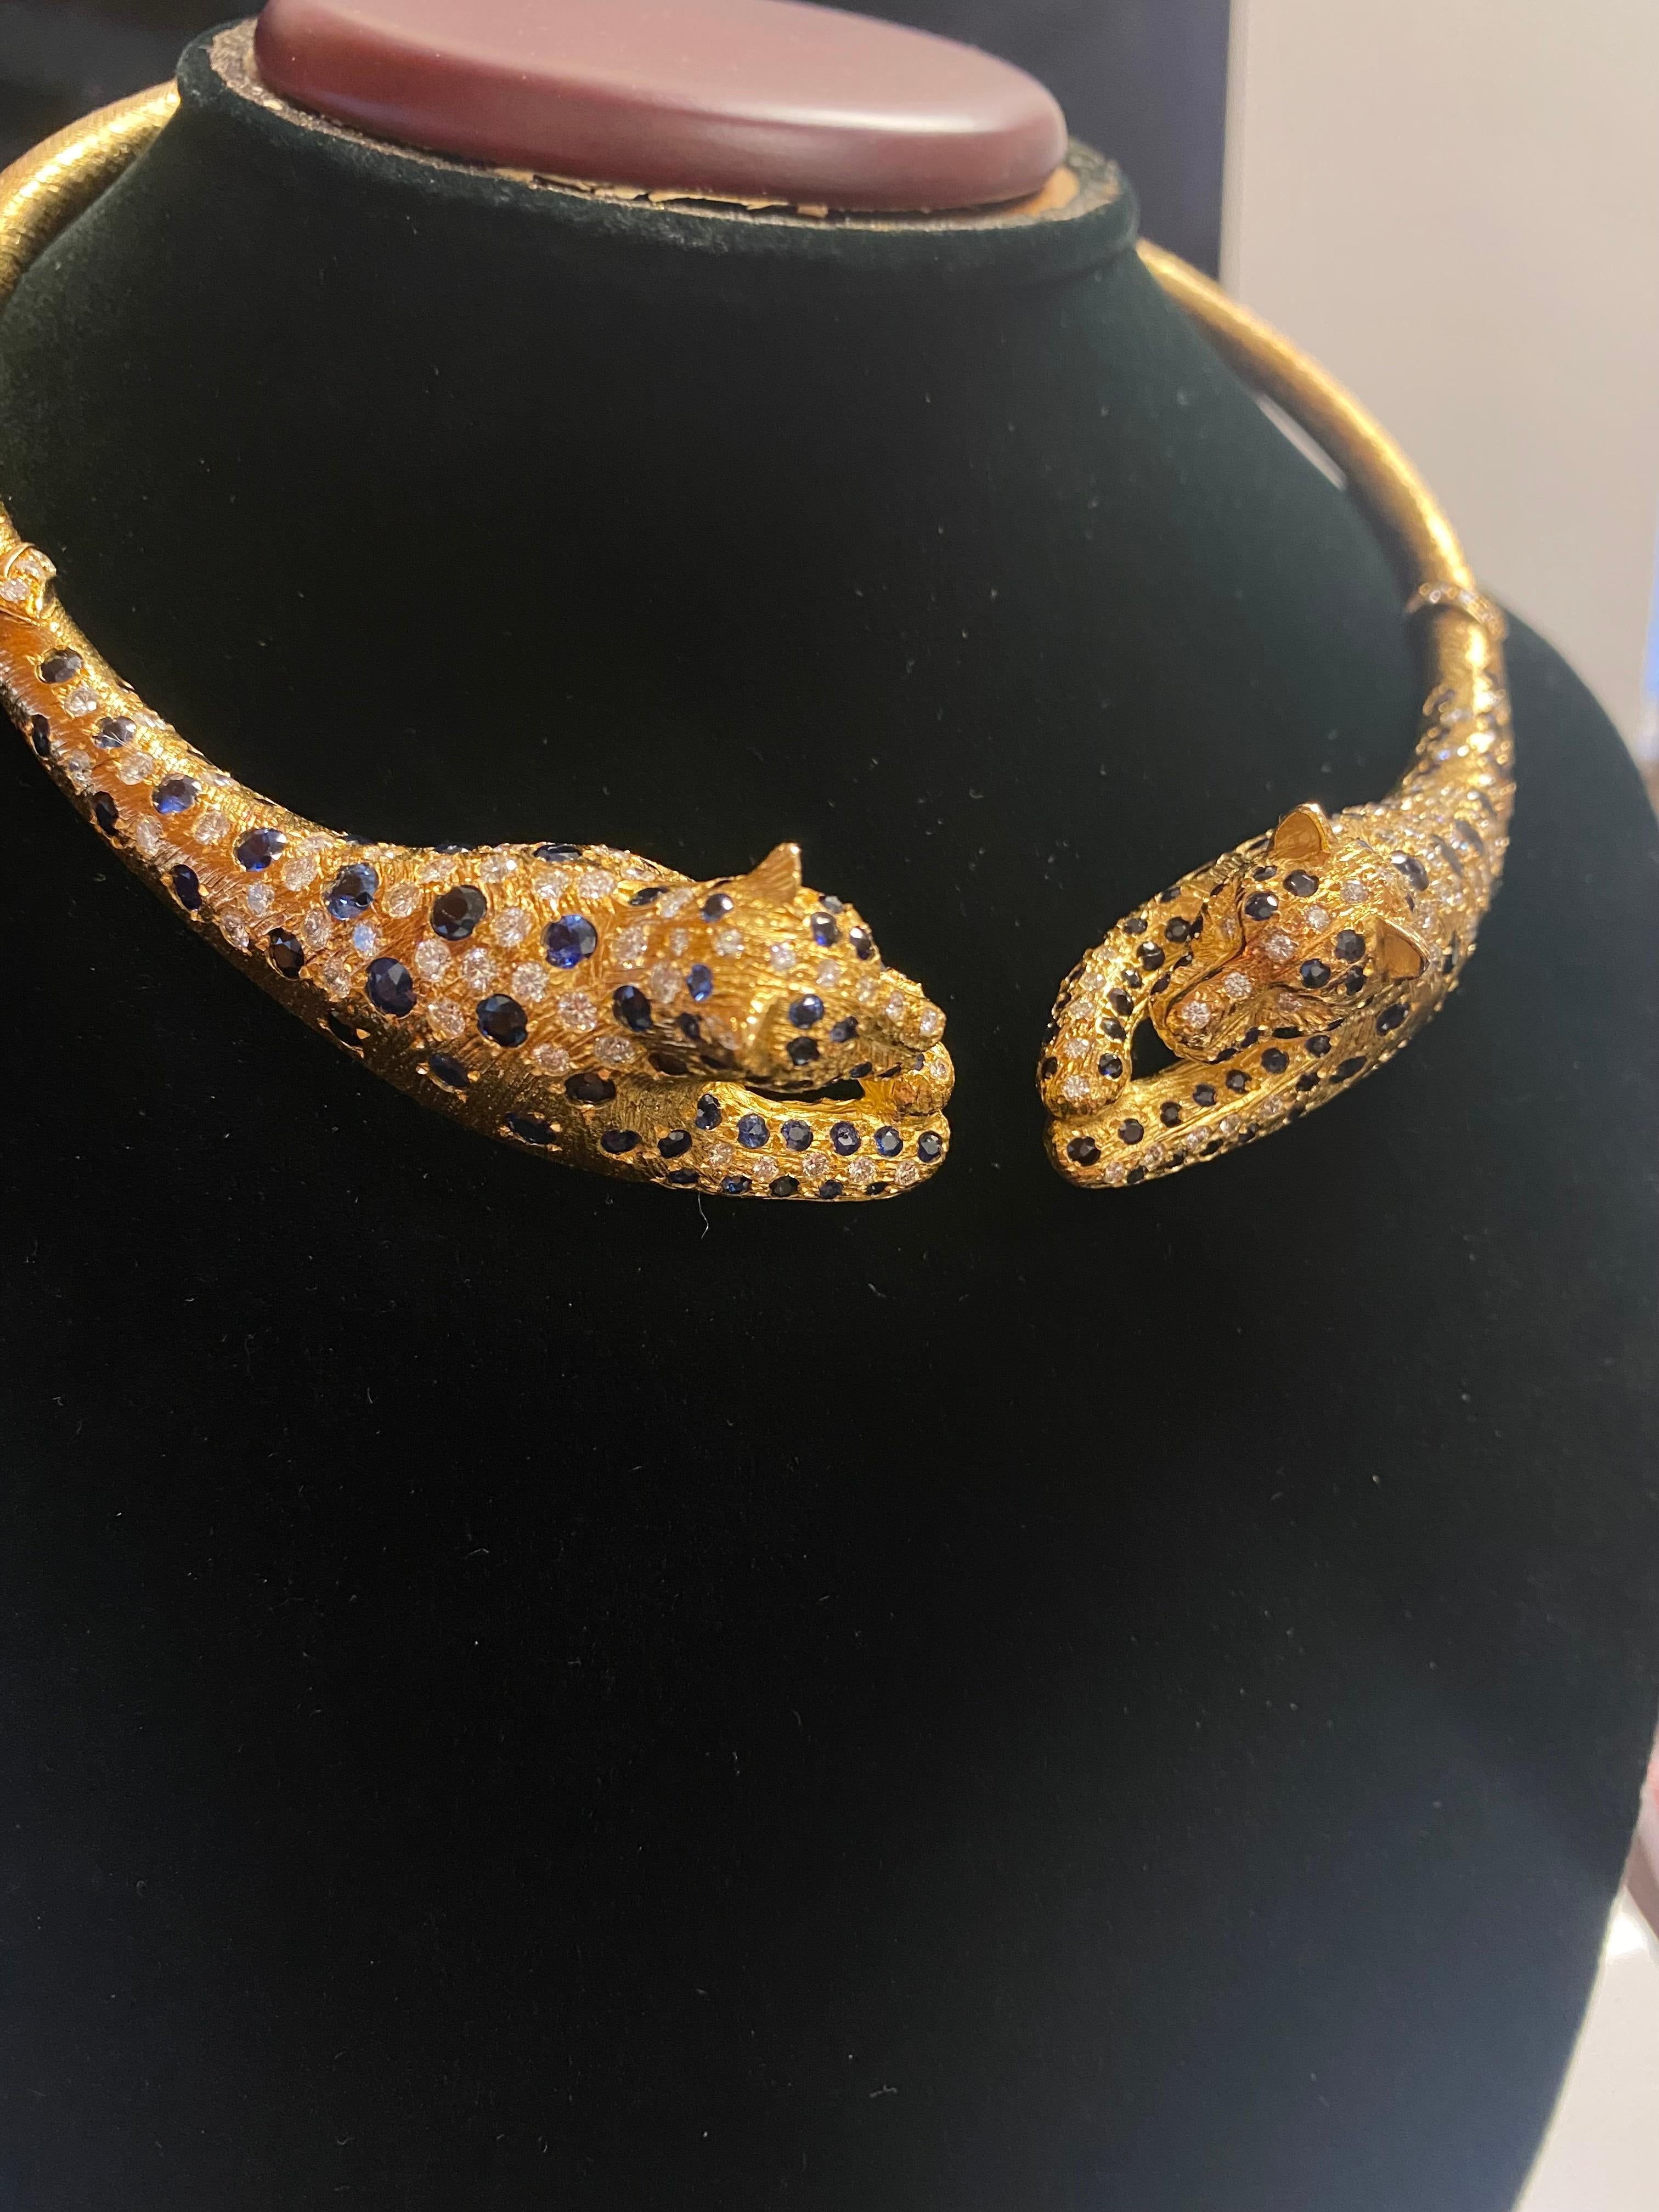 Diamond, sapphire, and 18K yellow gold spring-loaded choker necklace in a Cartier style with two leopards in a relaxed pose. This necklace features 120 natural diamonds of VS1 clarity/F-G color and 160 round cut blue sapphires. The necklace is